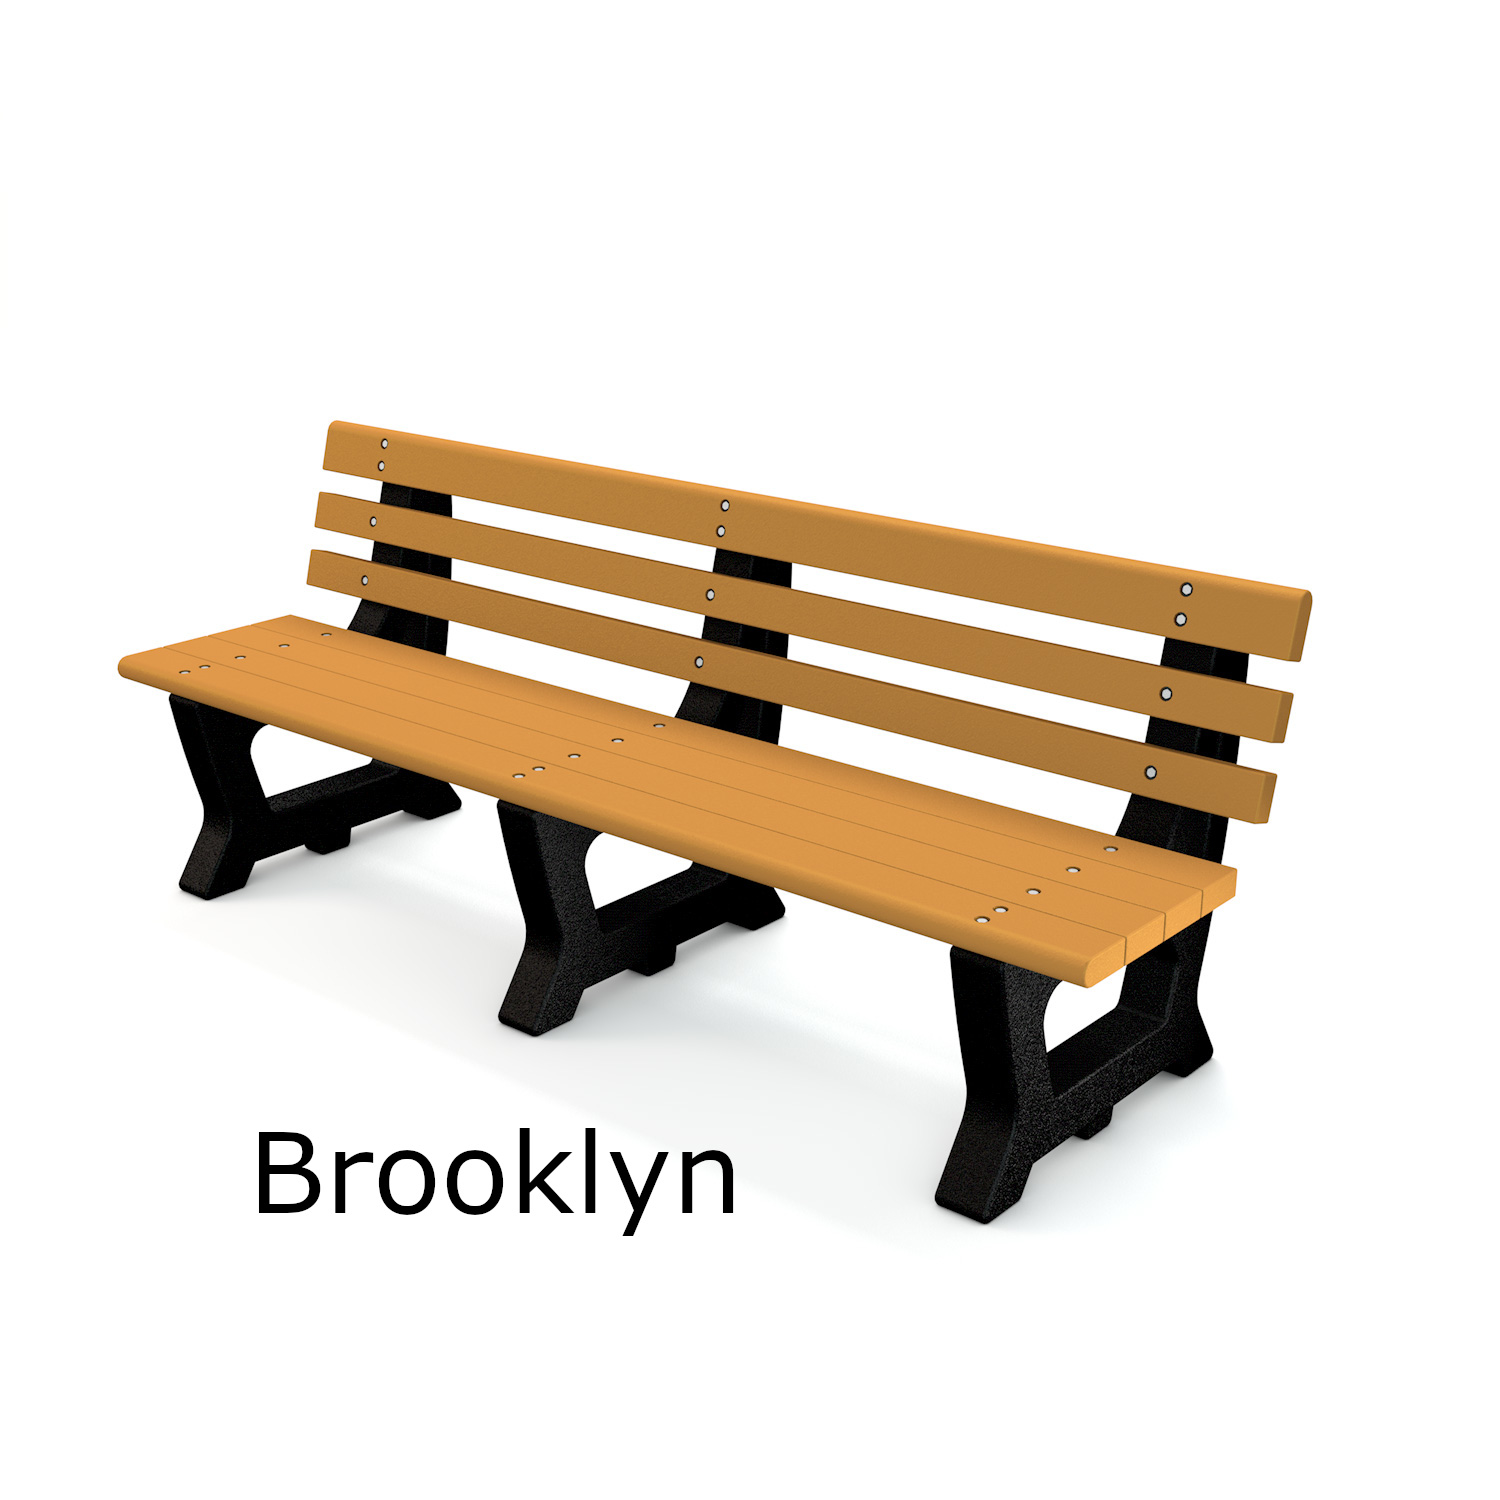 Brooklyn Recycled Plastic Lumber Park Bench